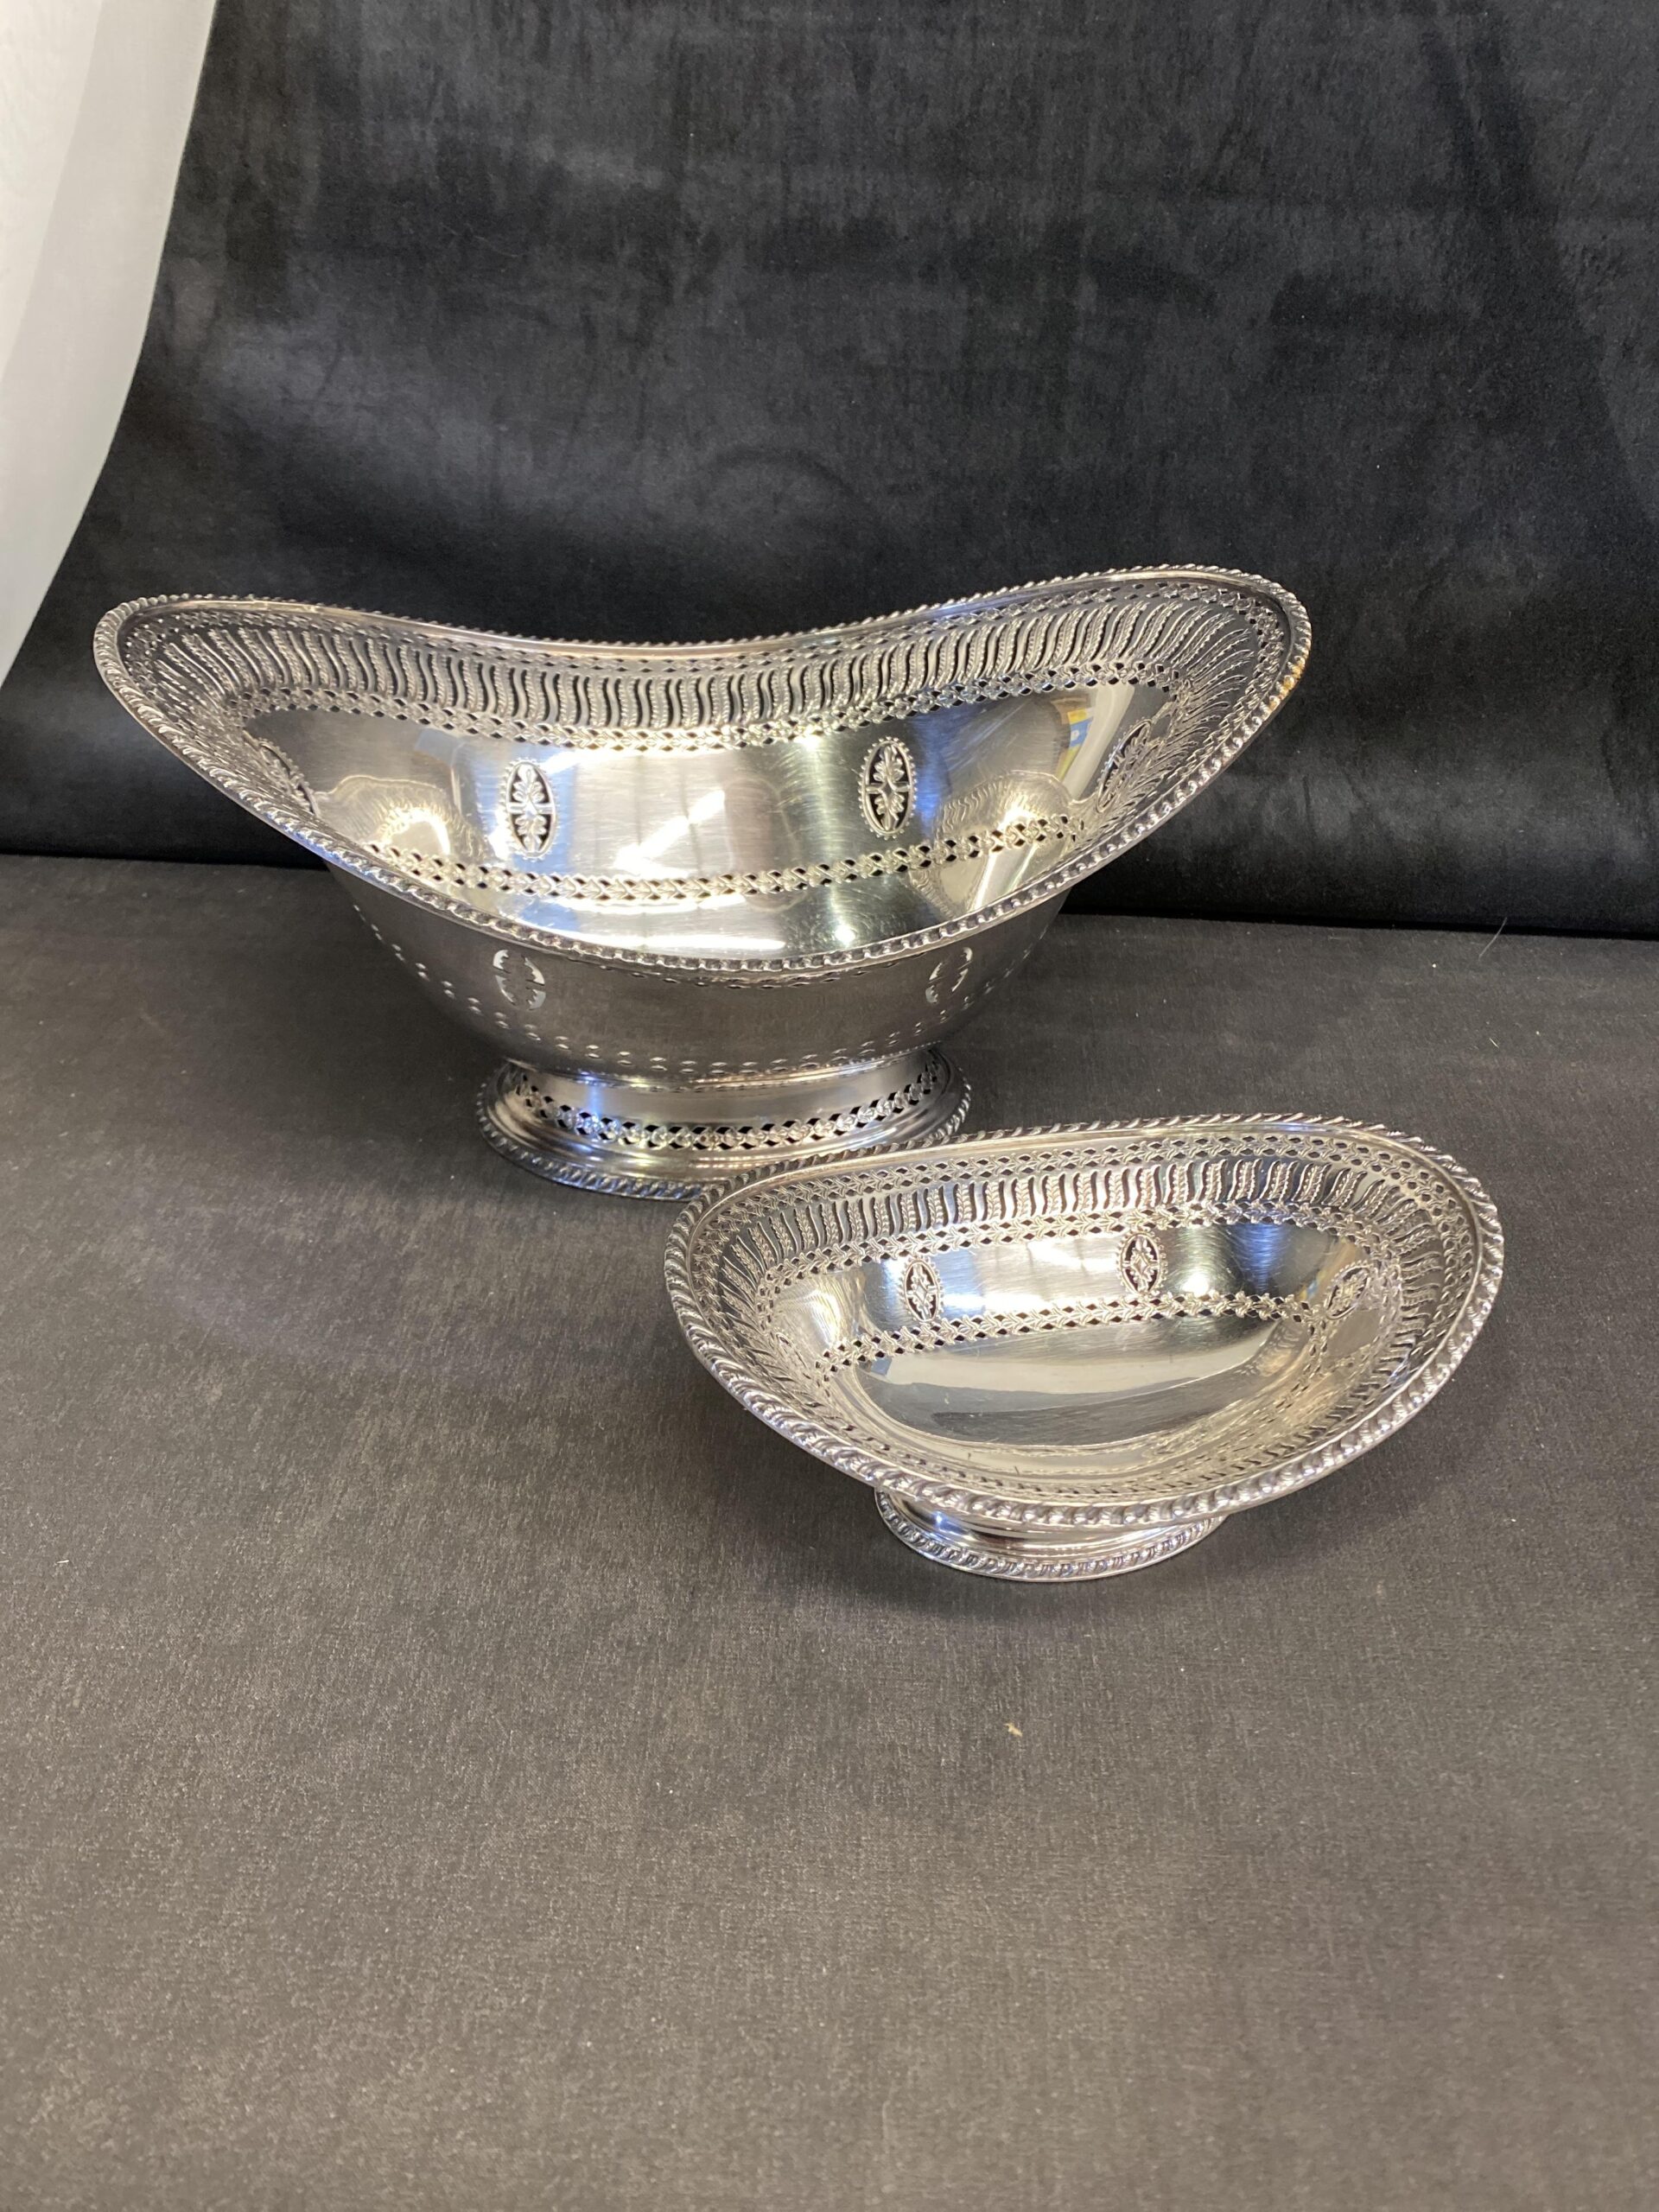 PAIR Silverplate Oval Bowls